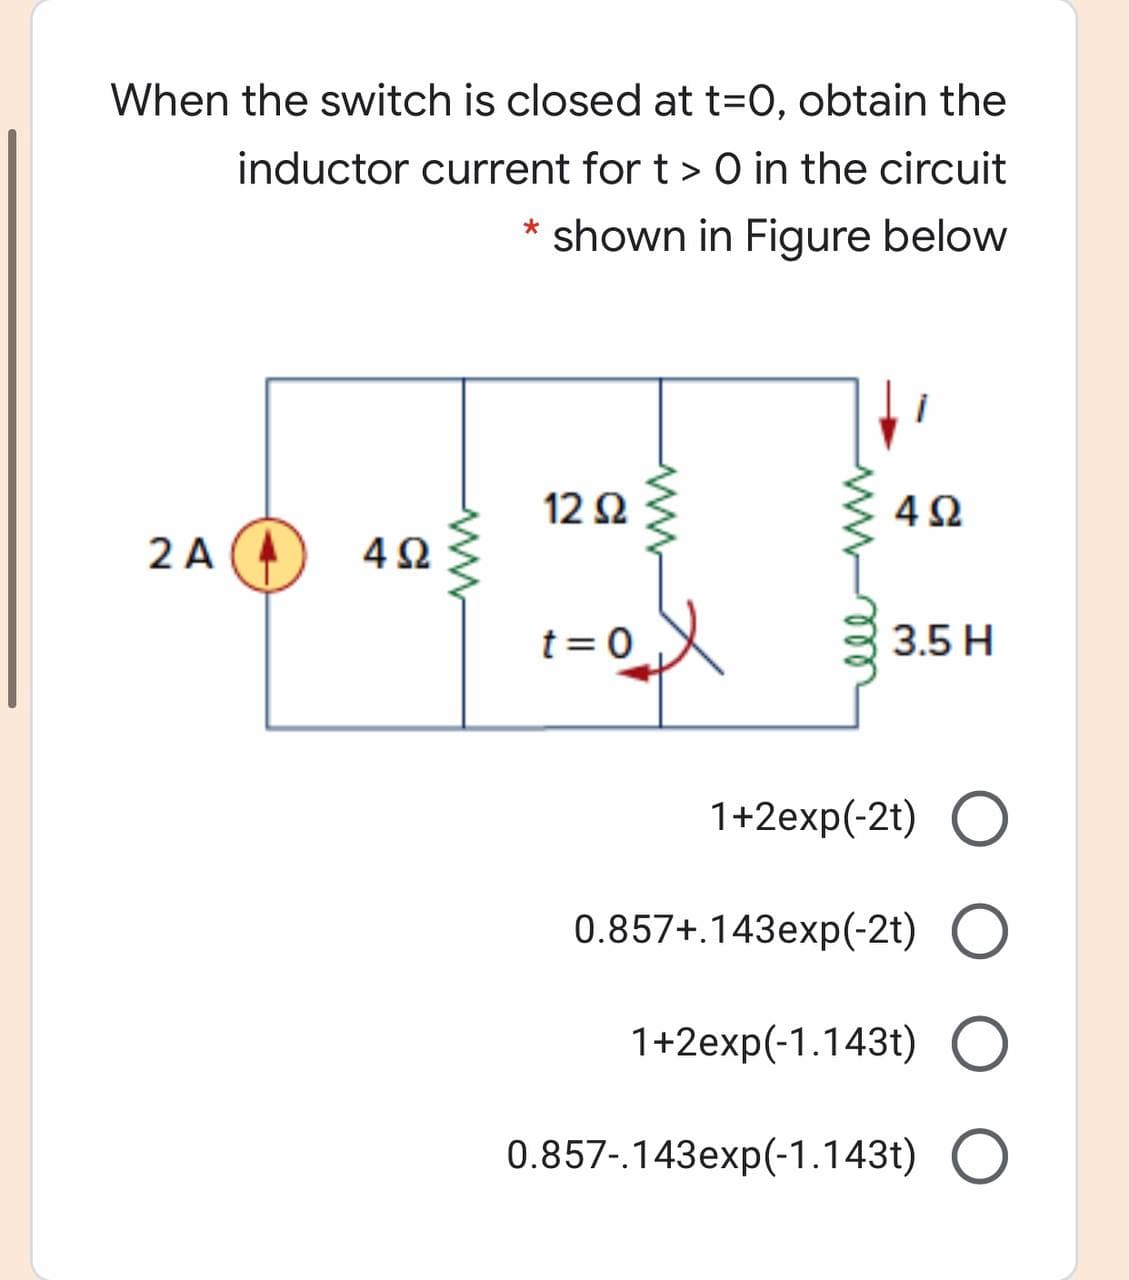 When the switch is closed at t=0, obtain the
inductor current for t > 0 in the circuit
shown in Figure below
12 Ω
4Ω
2 A (A
4Ω
t = 0
3.5 H
1+2exp(-2t) O
0.857+.143exp(-2t) O
1+2exp(-1.143t) O
0.857-.143exp(-1.143t) O
ww
